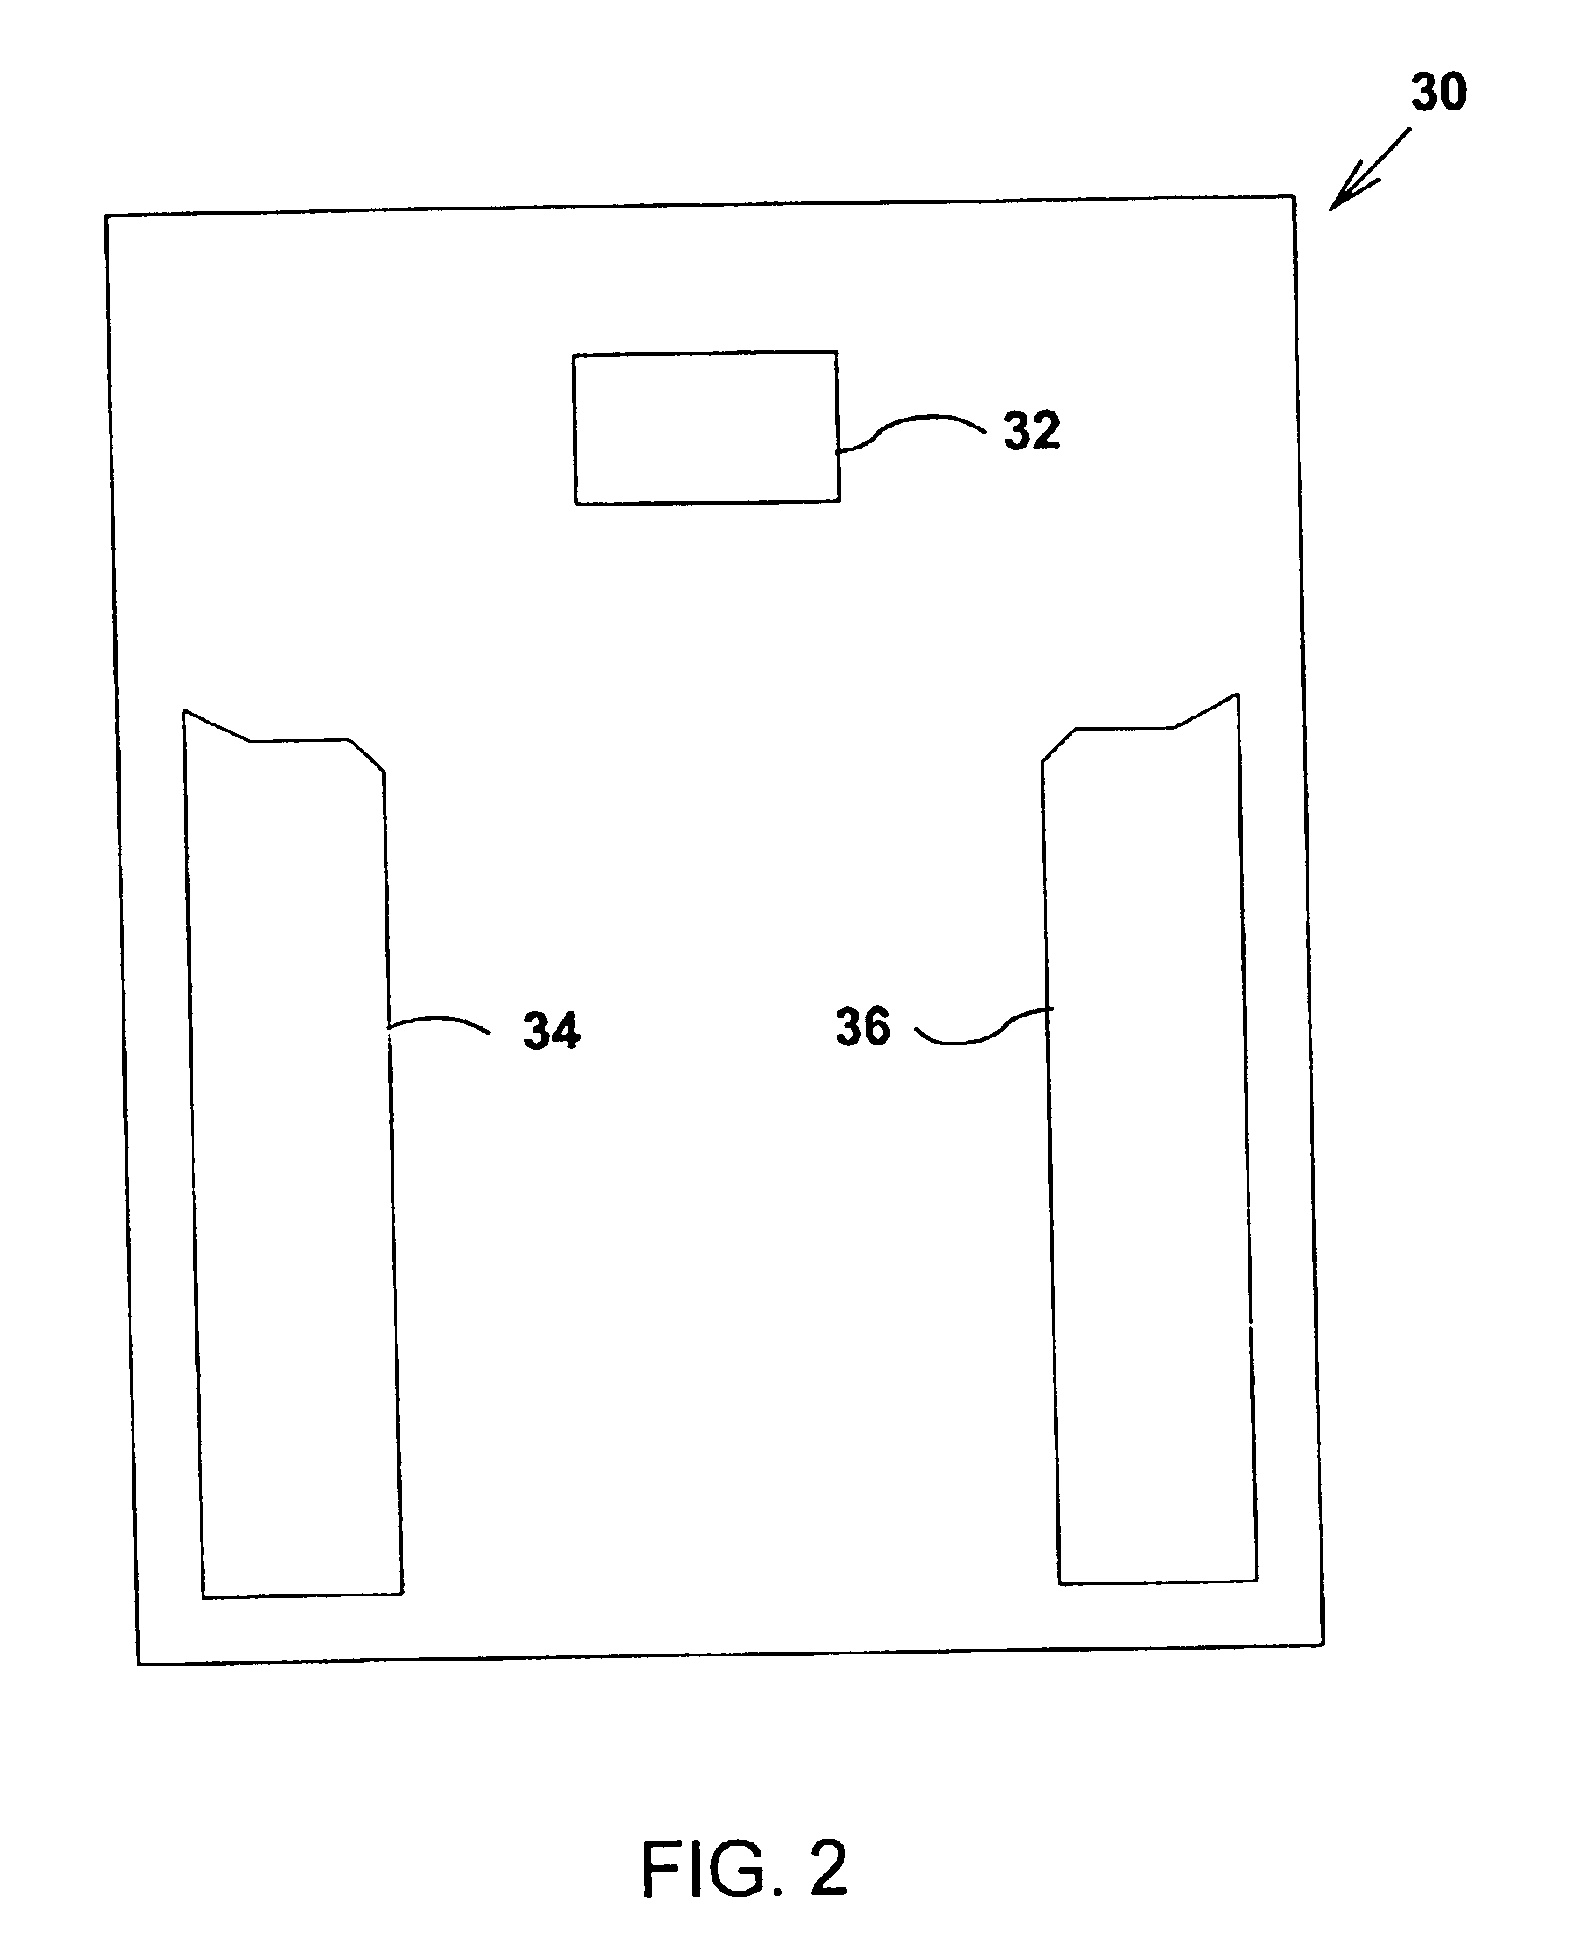 Alignment and correction template for optical profilometric measurement